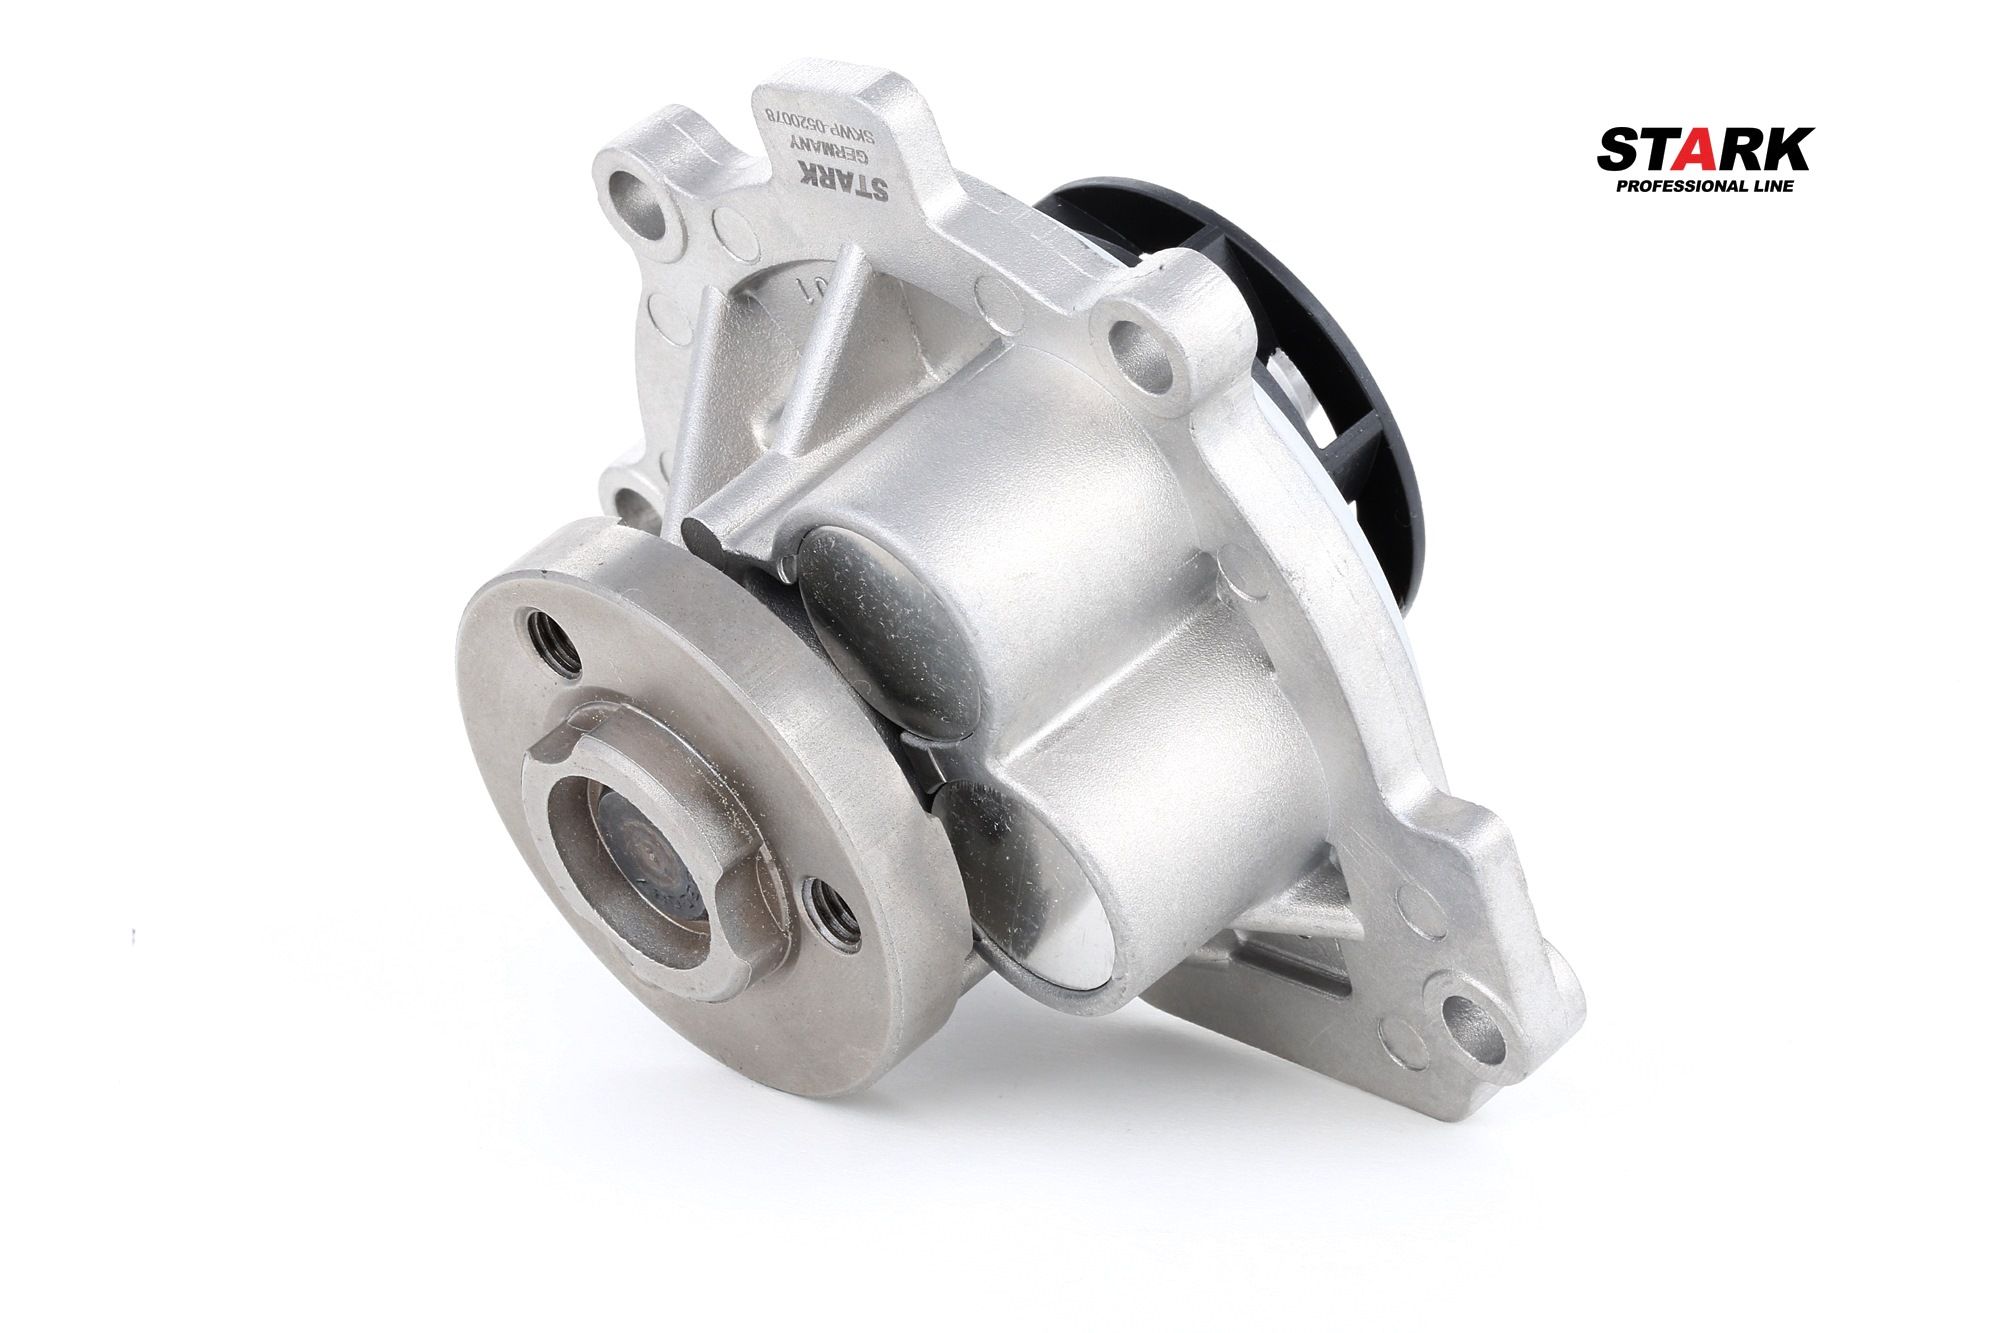 STARK SKWP-0520078 Water pump Cast Aluminium, without belt pulley, with seal ring, Mechanical